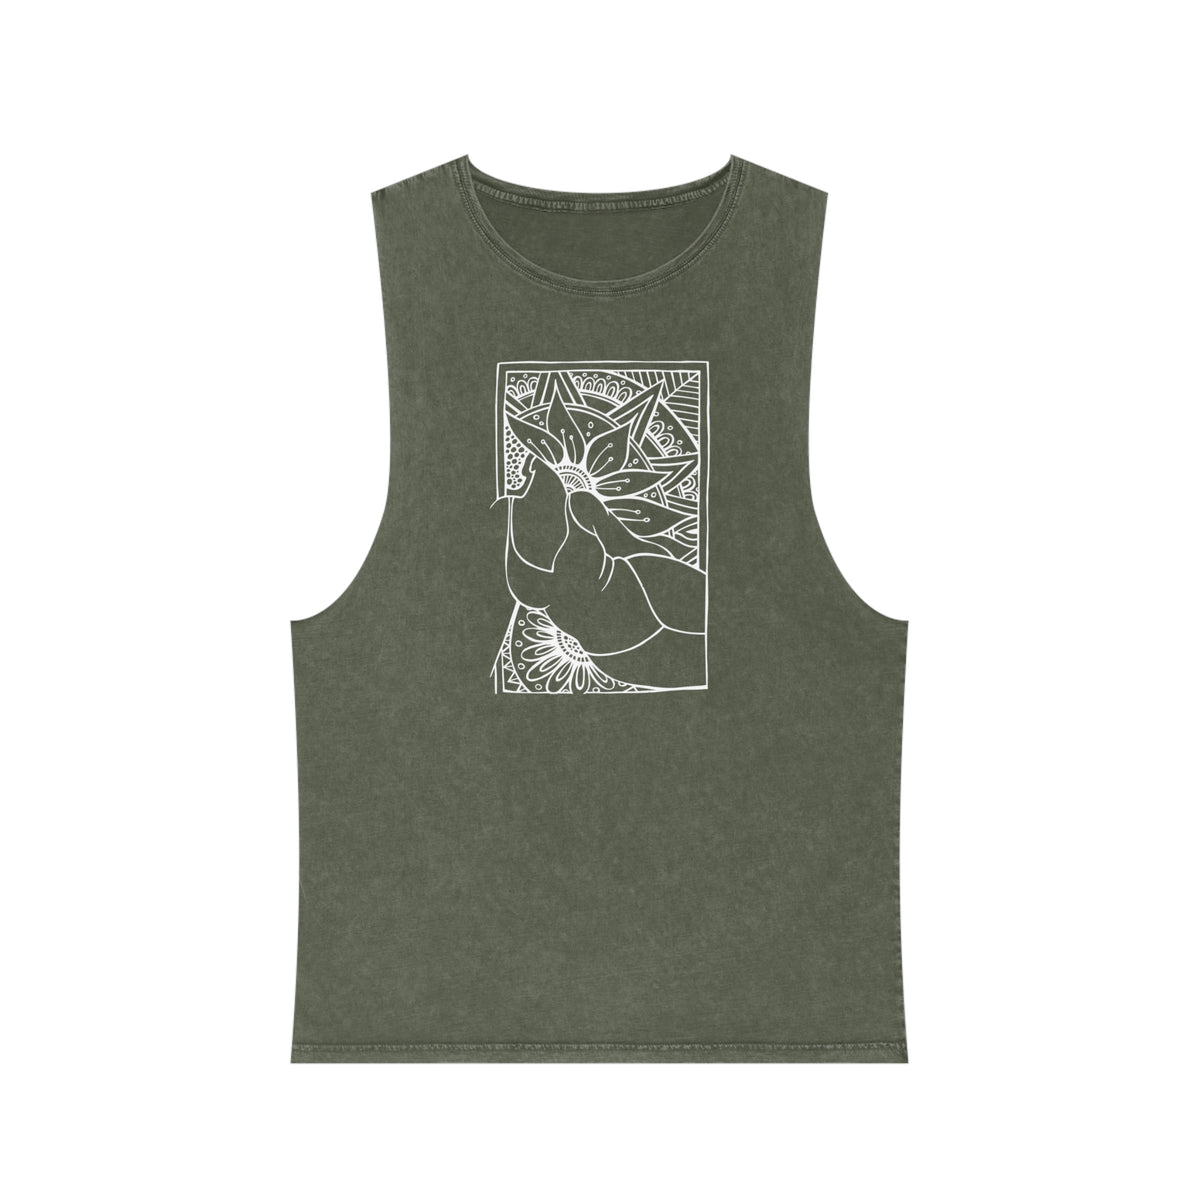 All That Tank Top - 2 colours